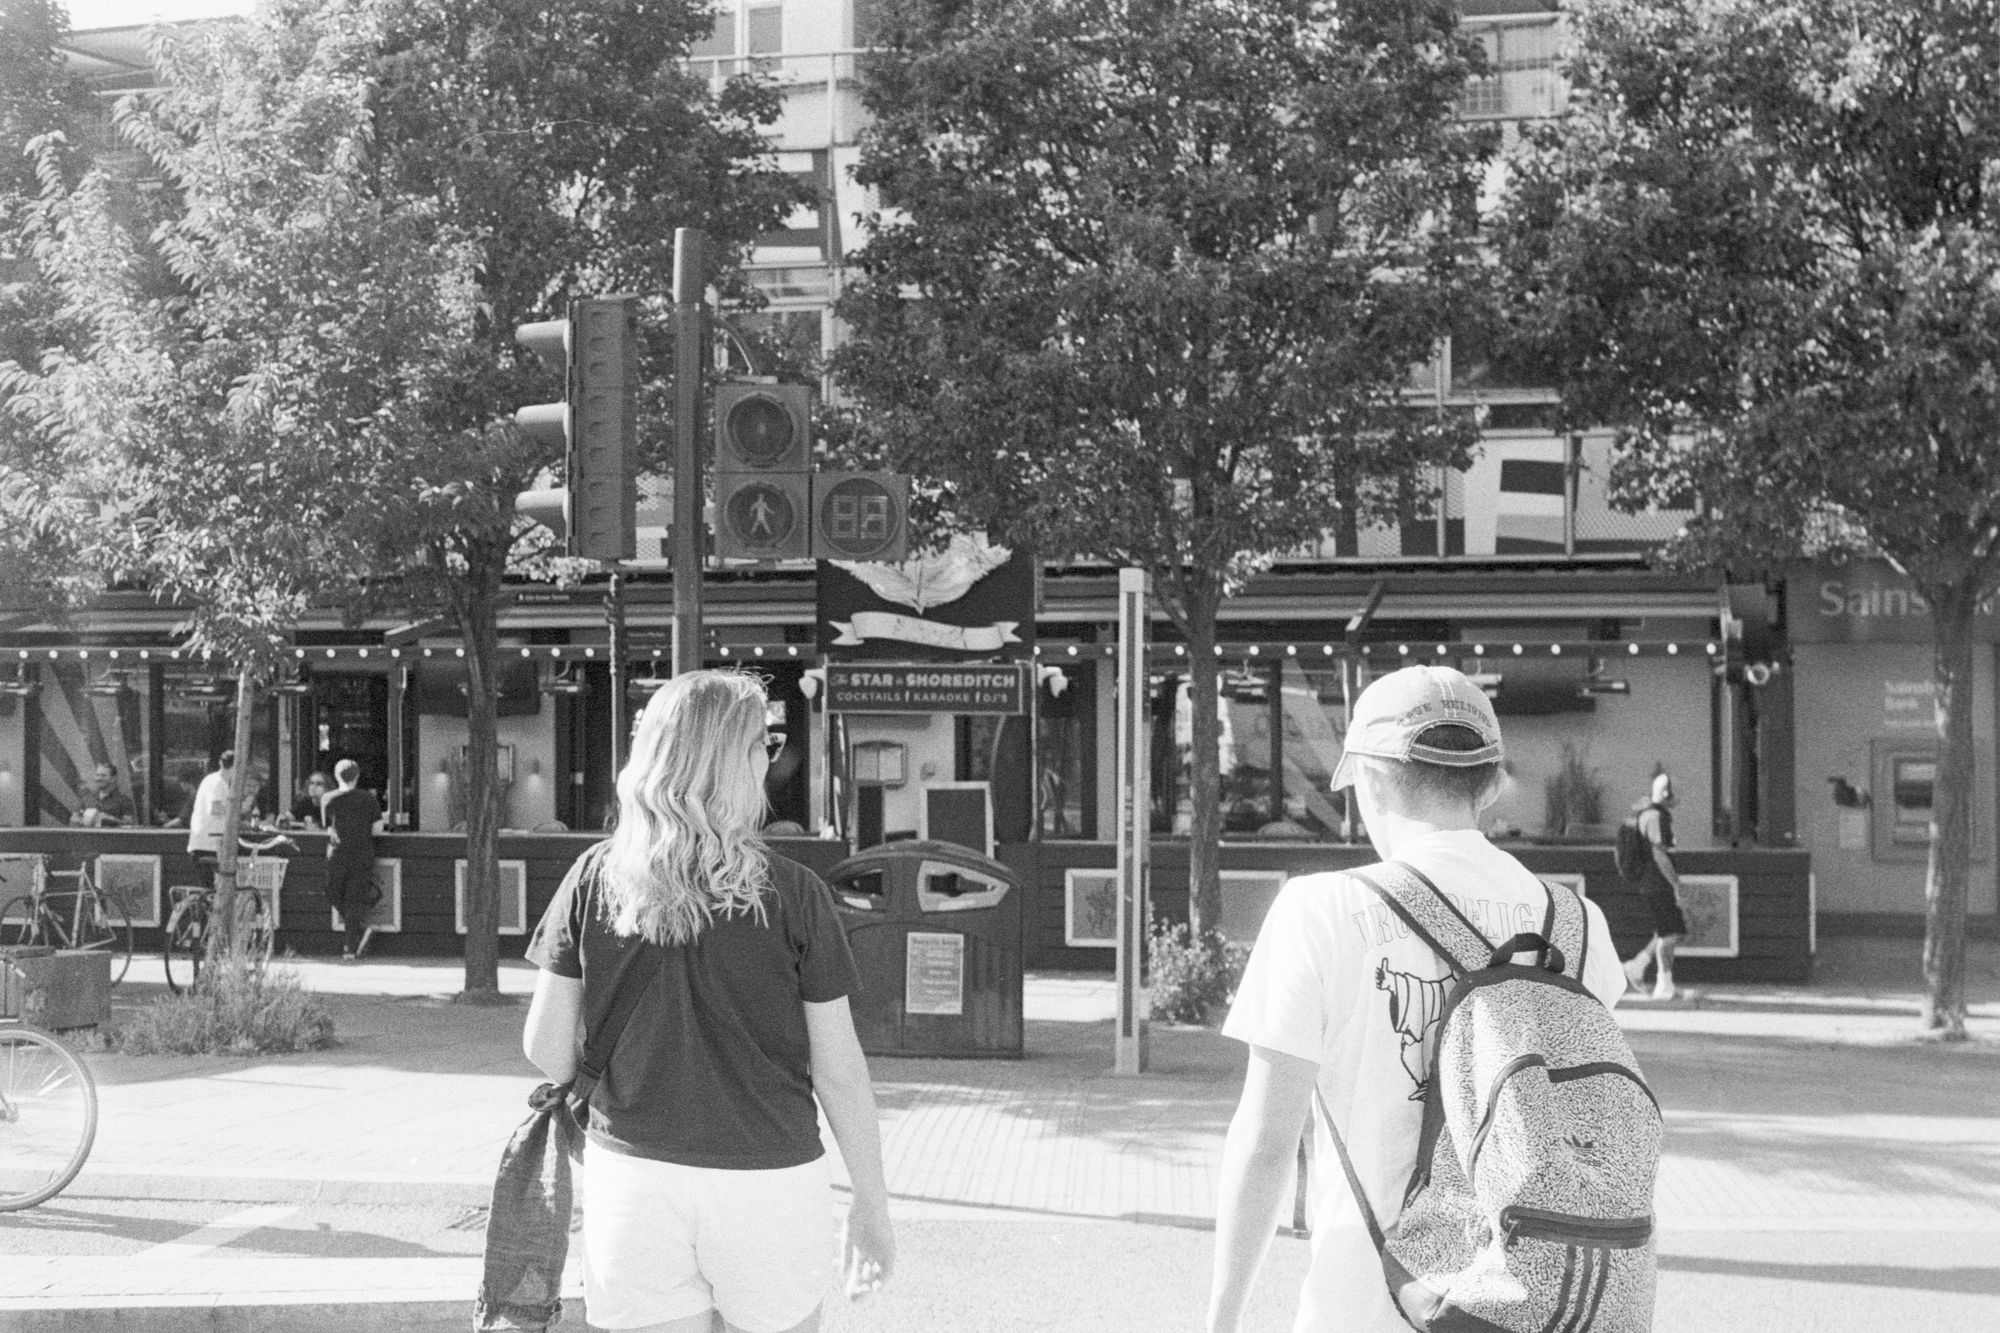 Two people (a woman in a black t-shirt carrying a handbag and a man in a white t-shirt and cap) walk away from camera on a pedestrian crossing, towards a parade of shops with trees, in crisp black and white on a swelteringly sunny afternoon